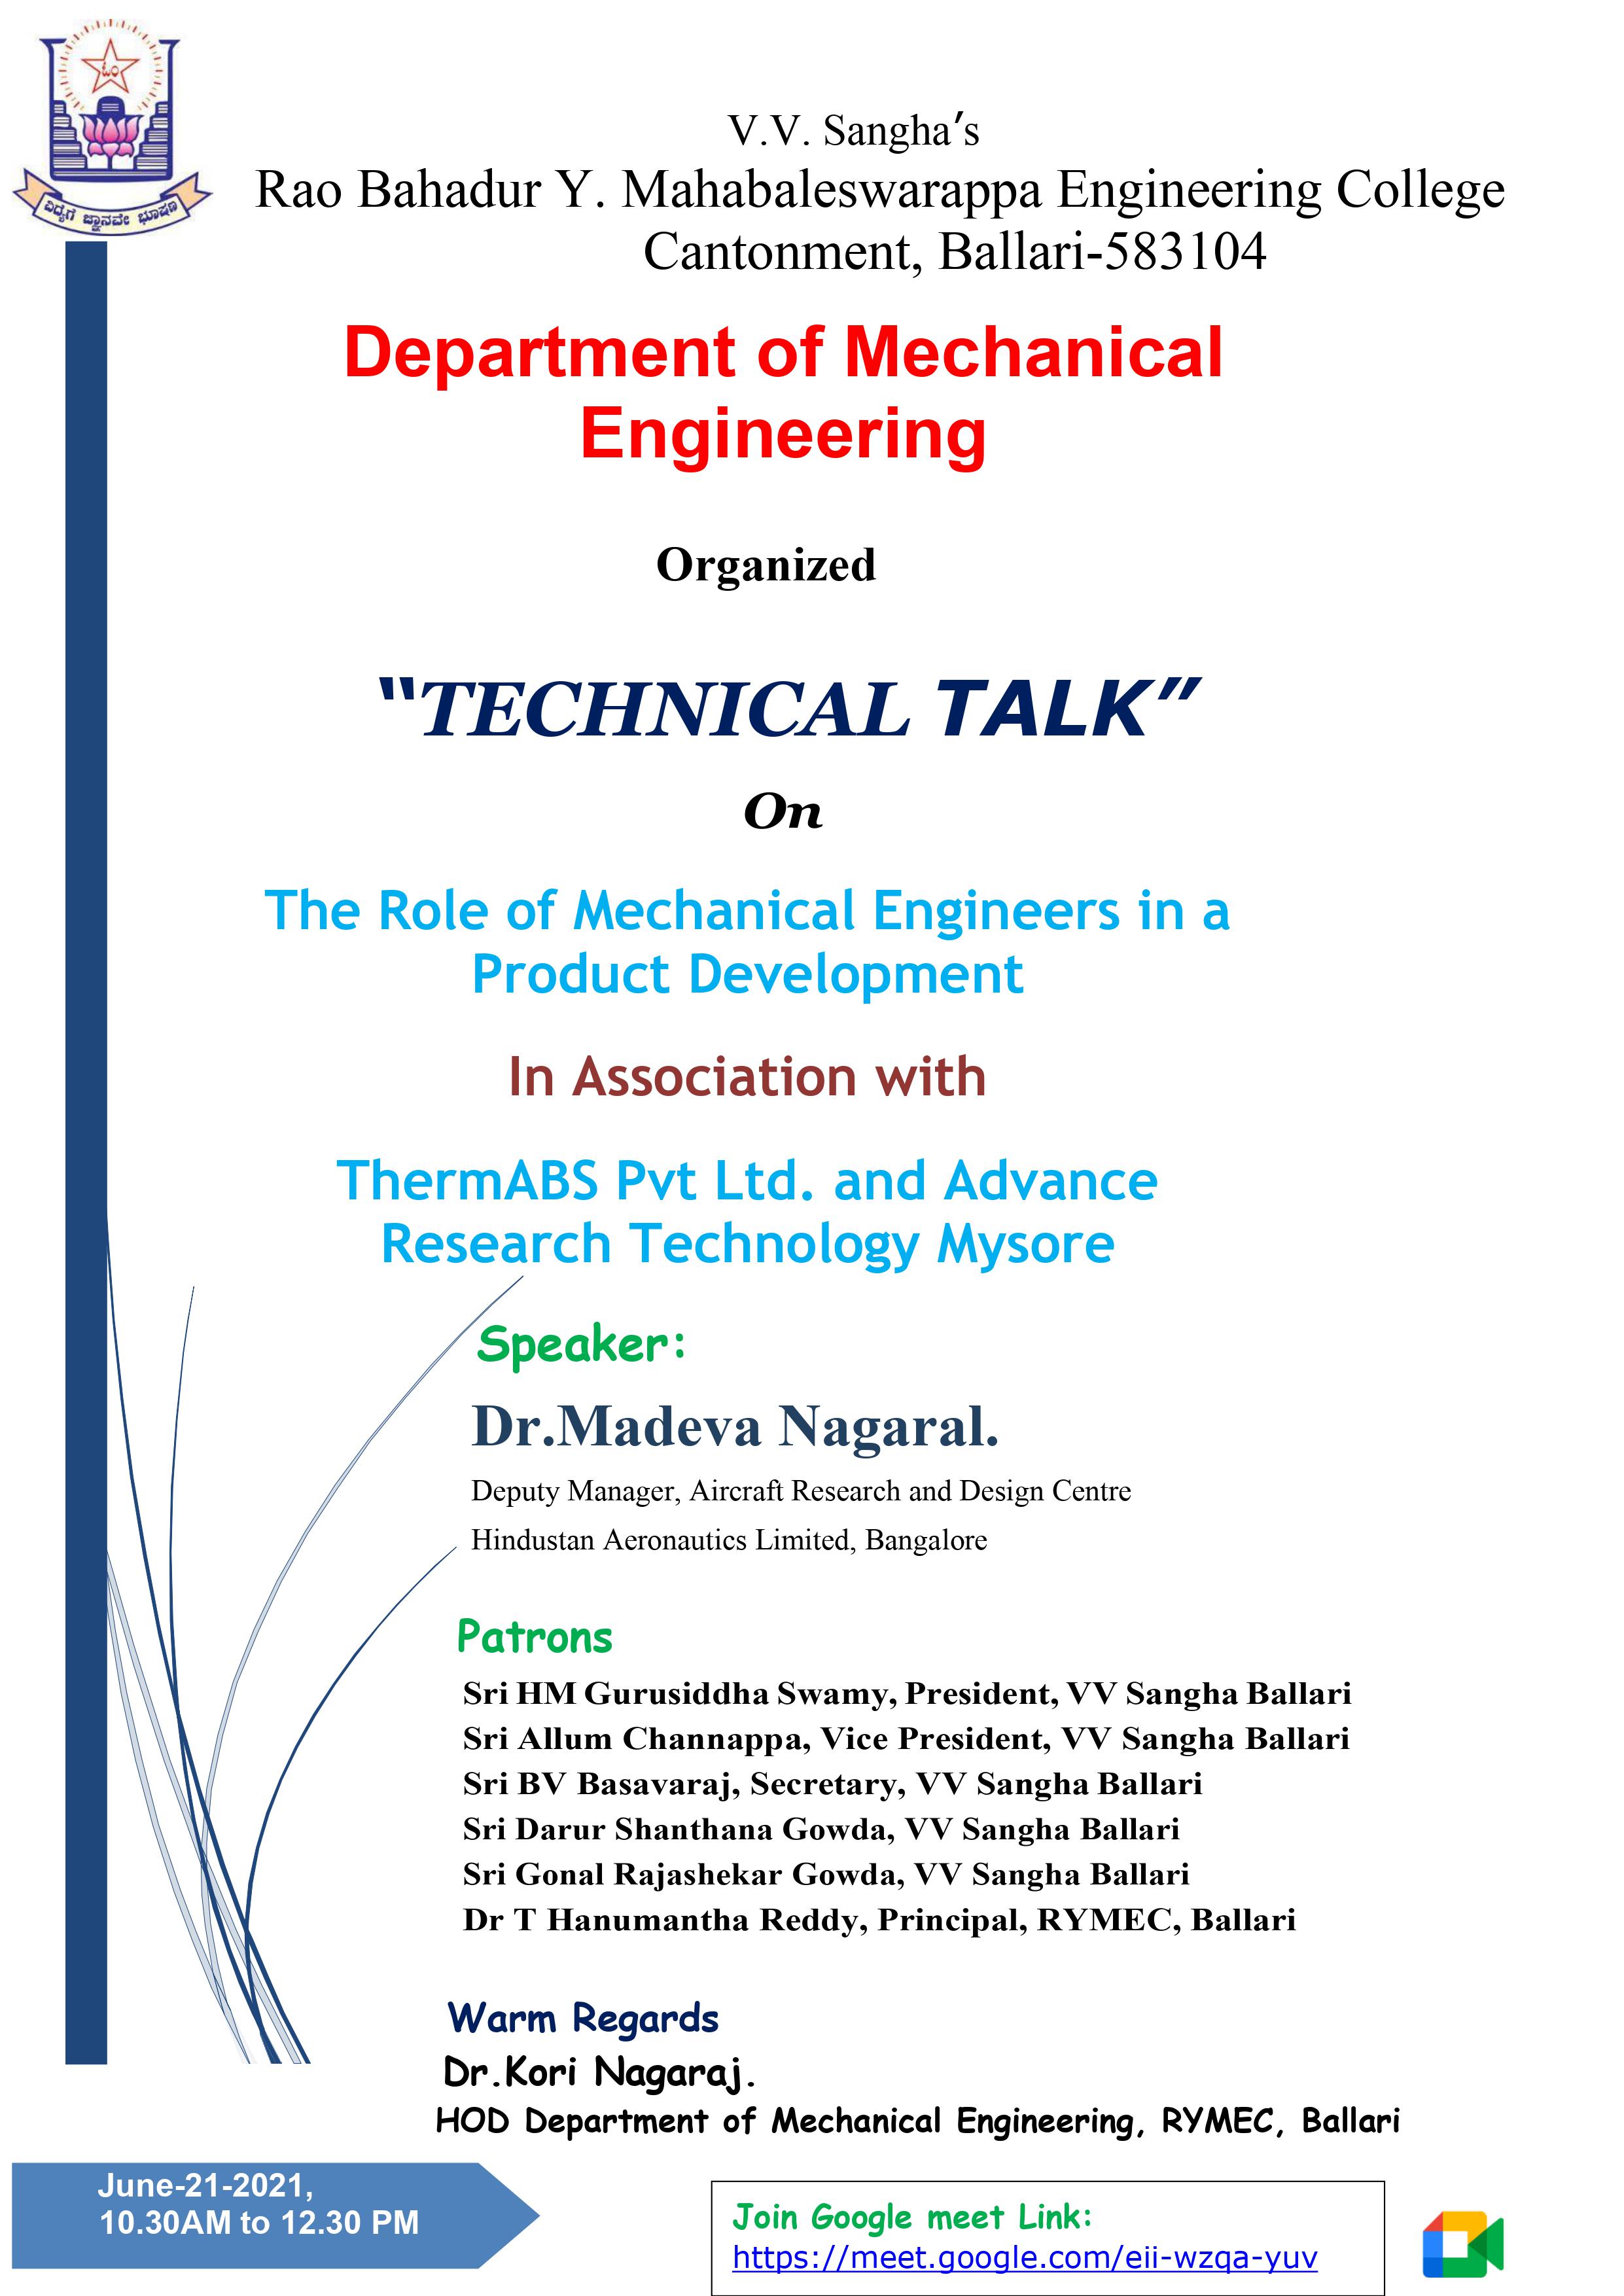 Role of Mechanical Engineers in a Product Development